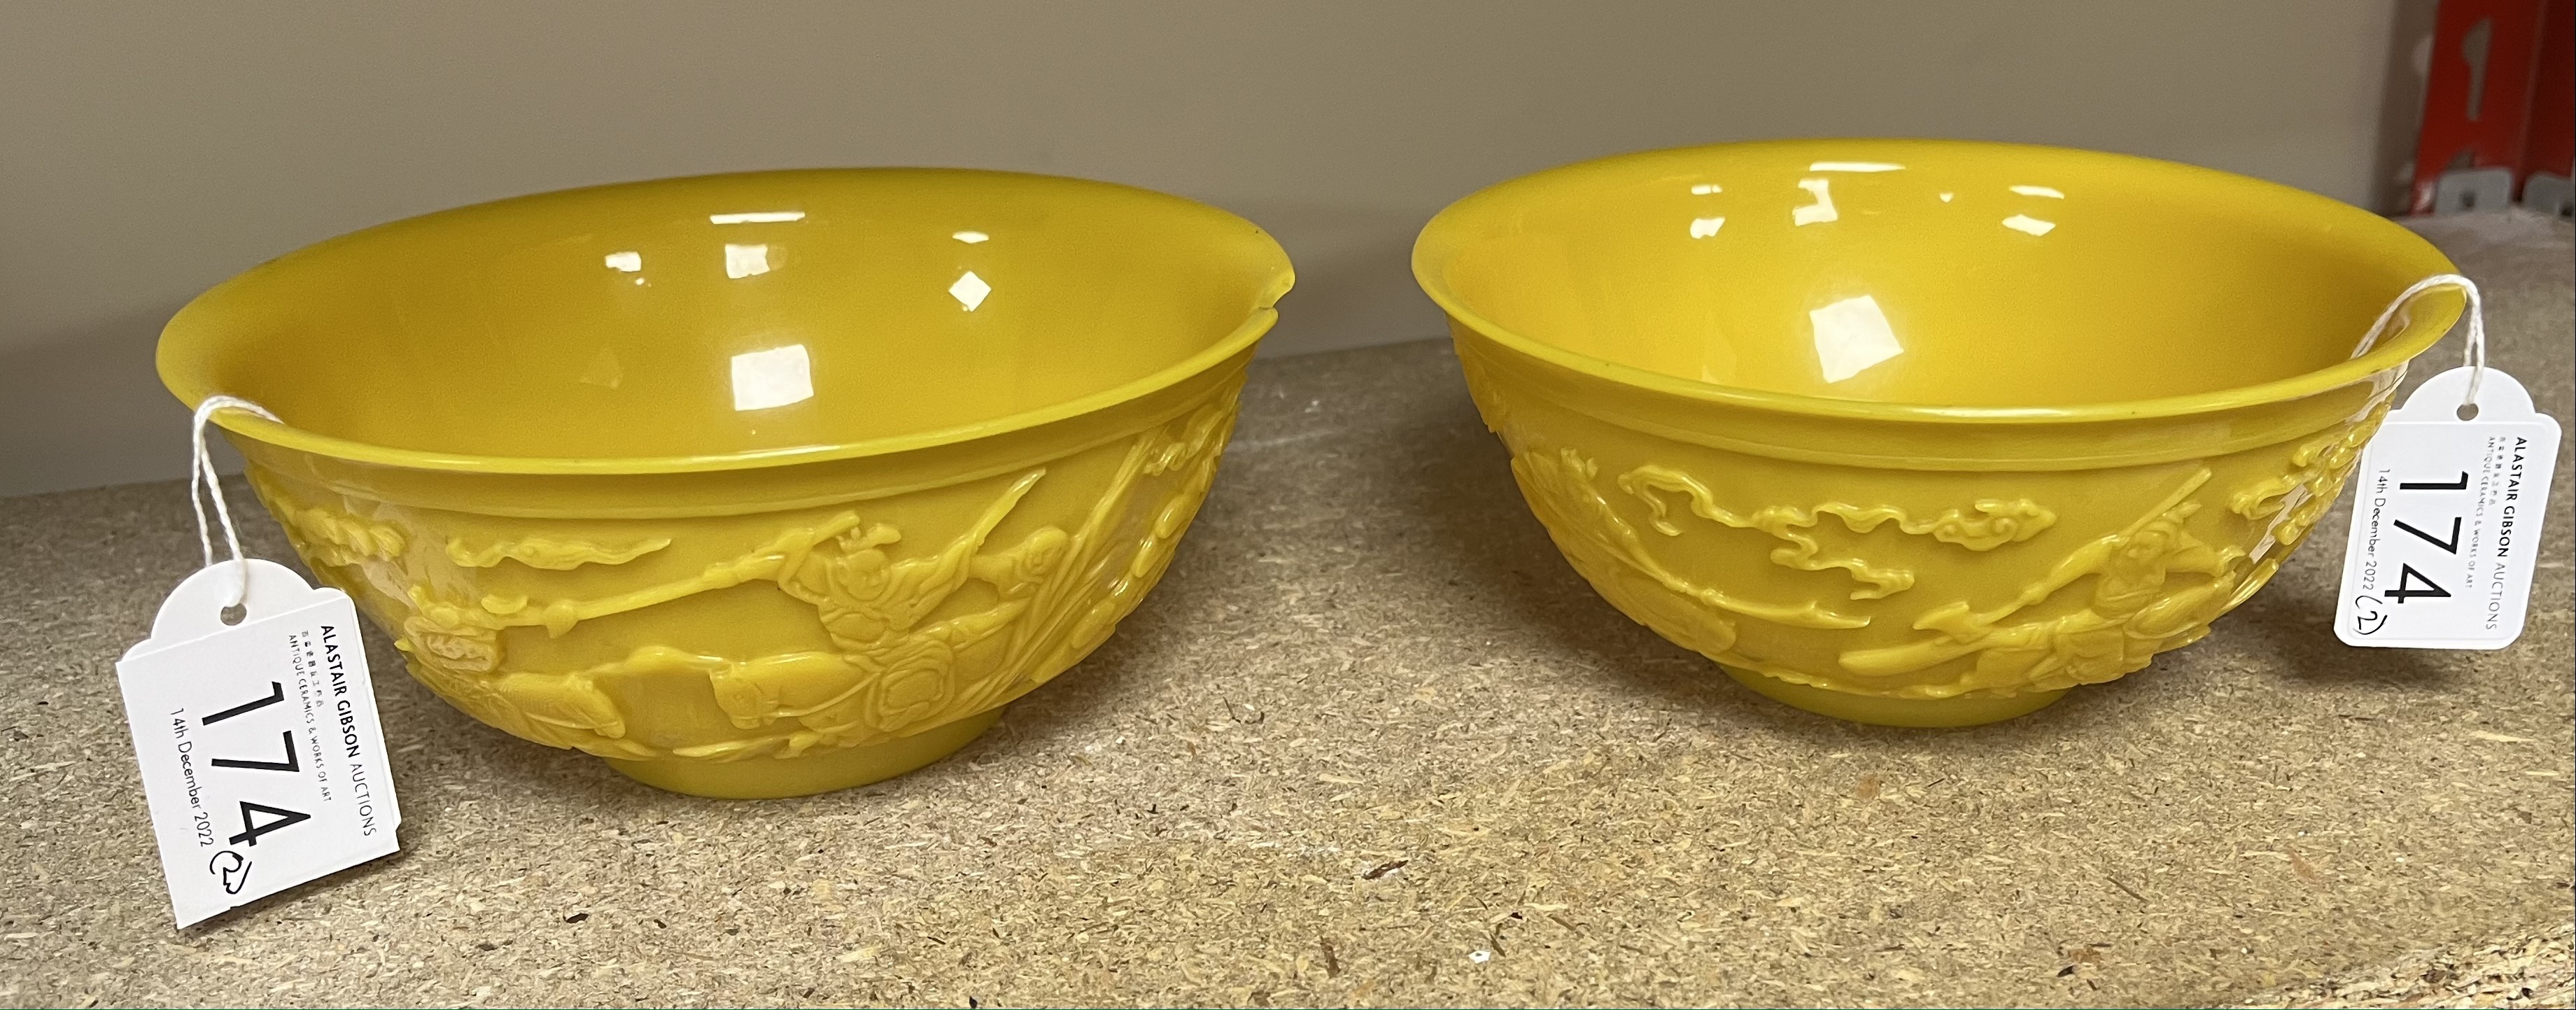 A PAIR OF CHINESE ‘IMPERIAL’ YELLOW GLASS BOWLS, QING DYNASTY, 19TH CENTURY - Image 5 of 10